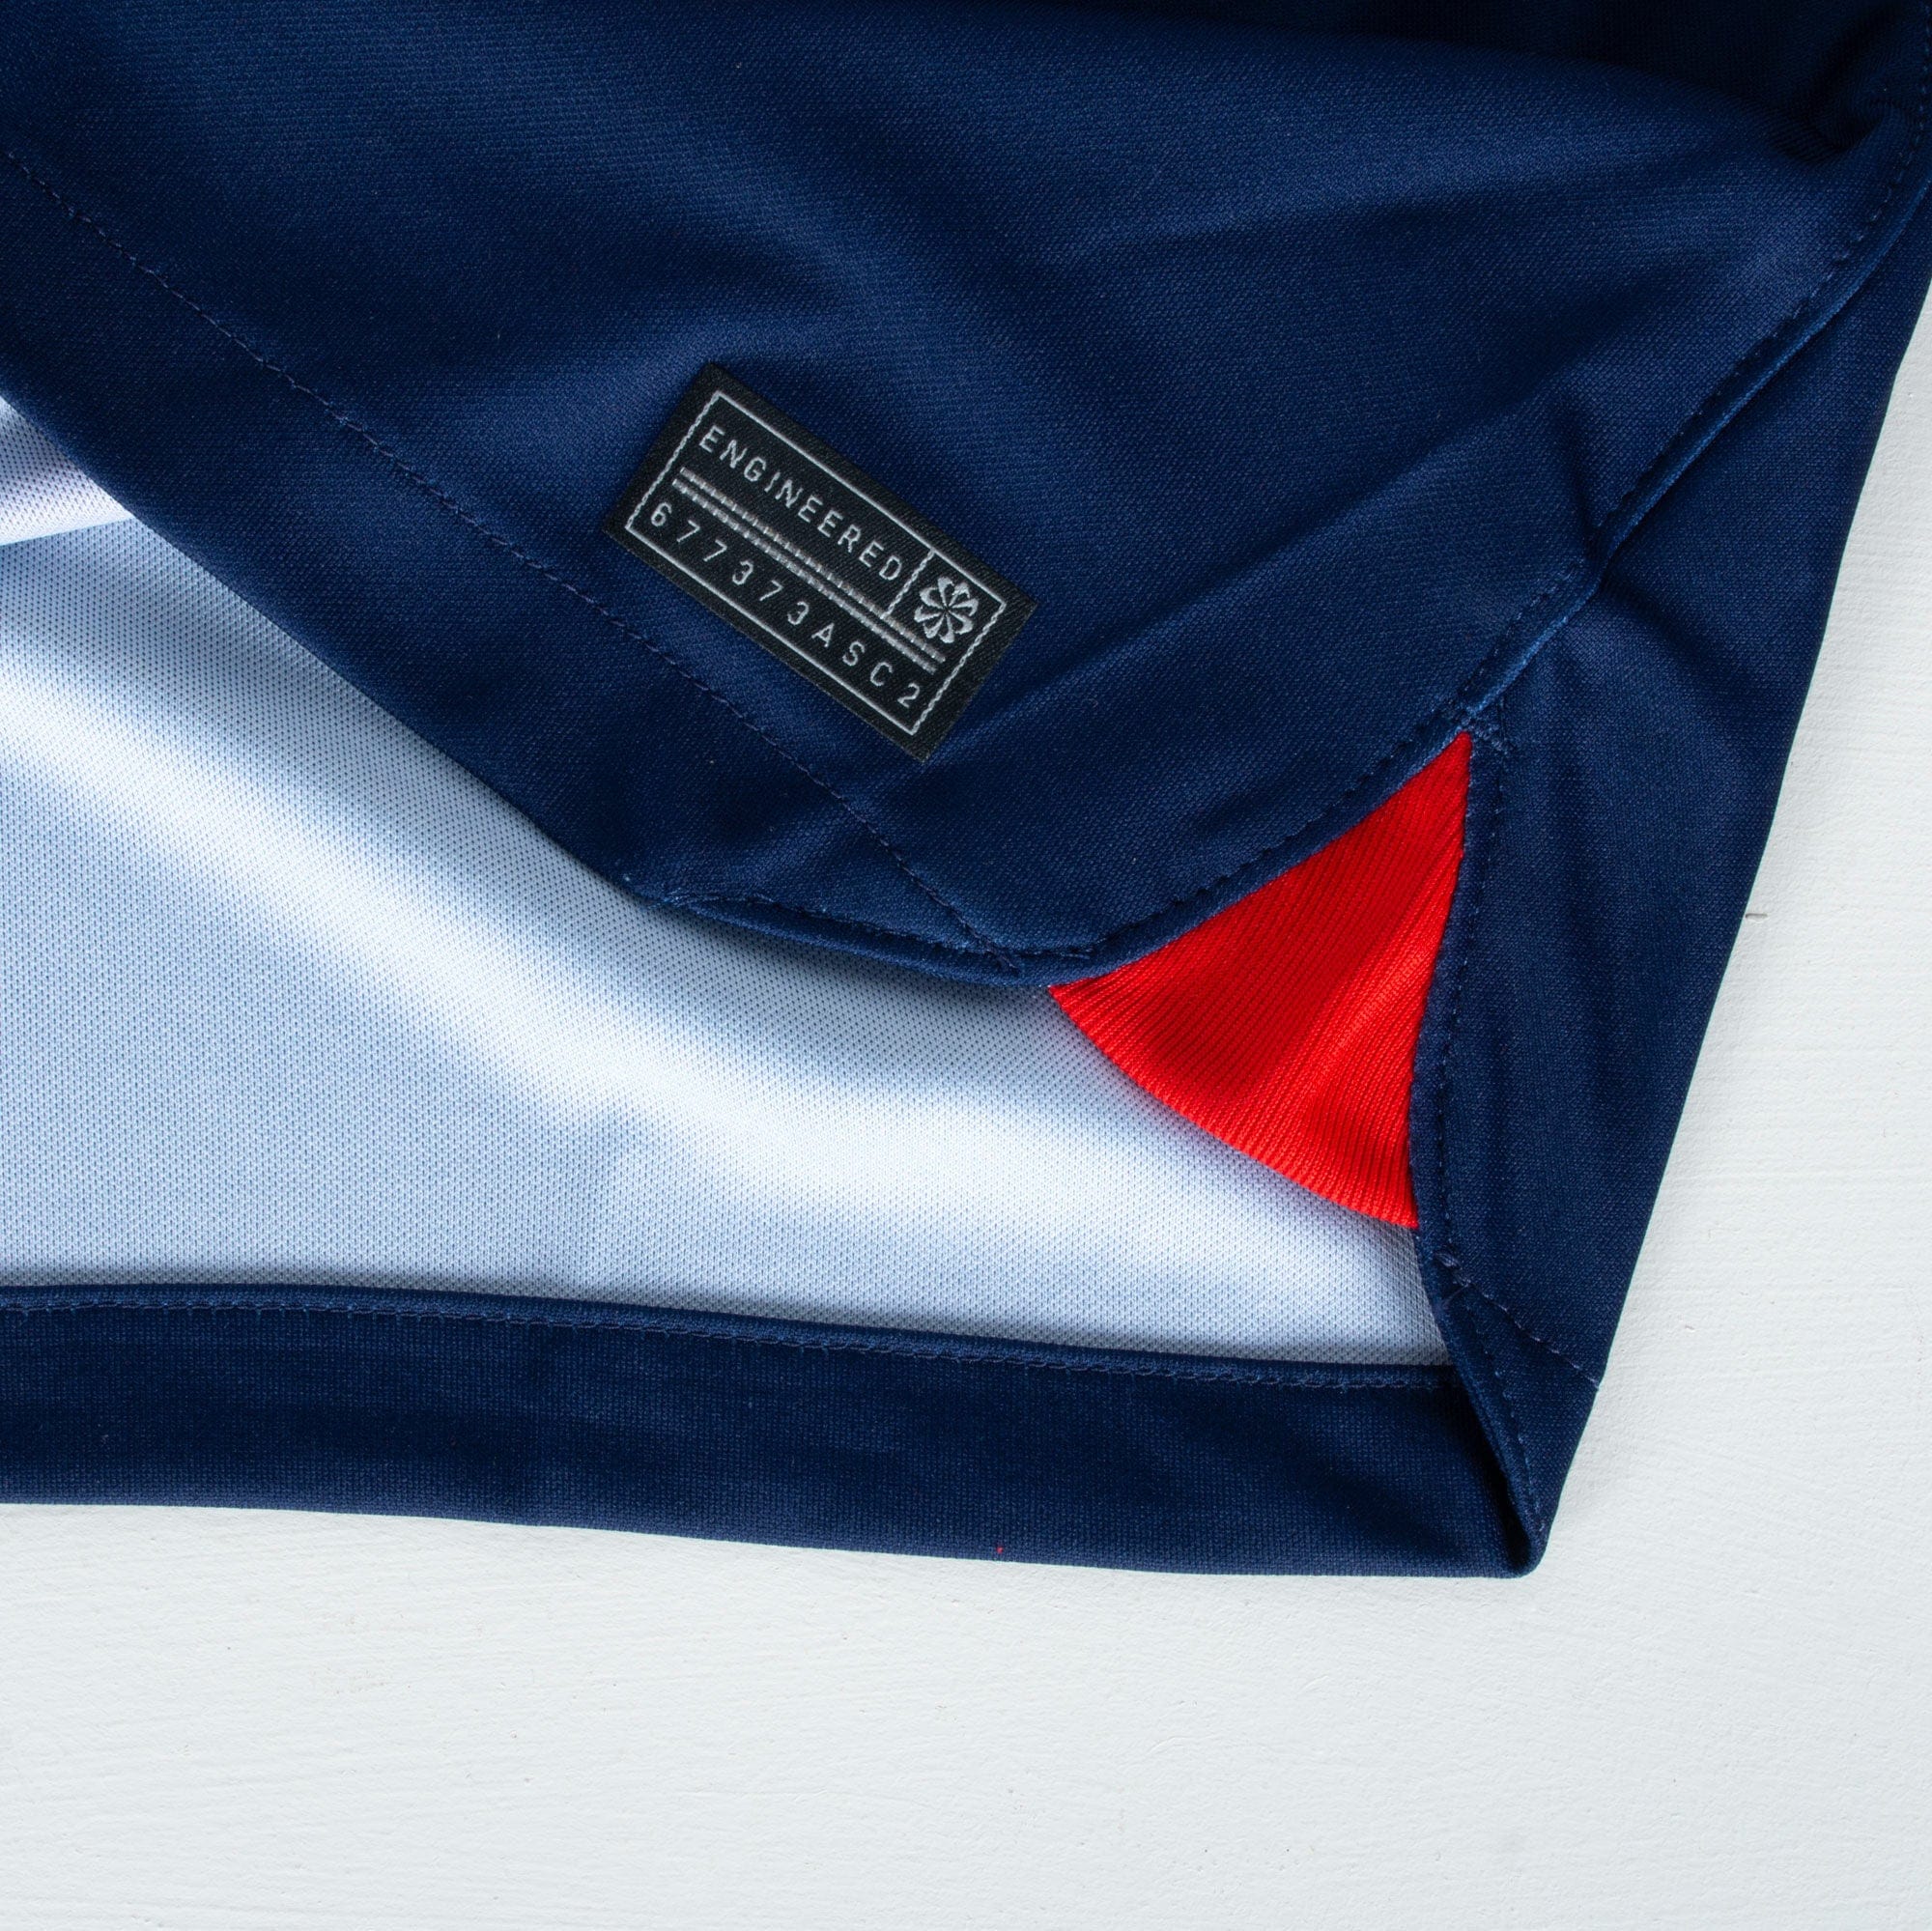 PSG Home Jersey 23/24